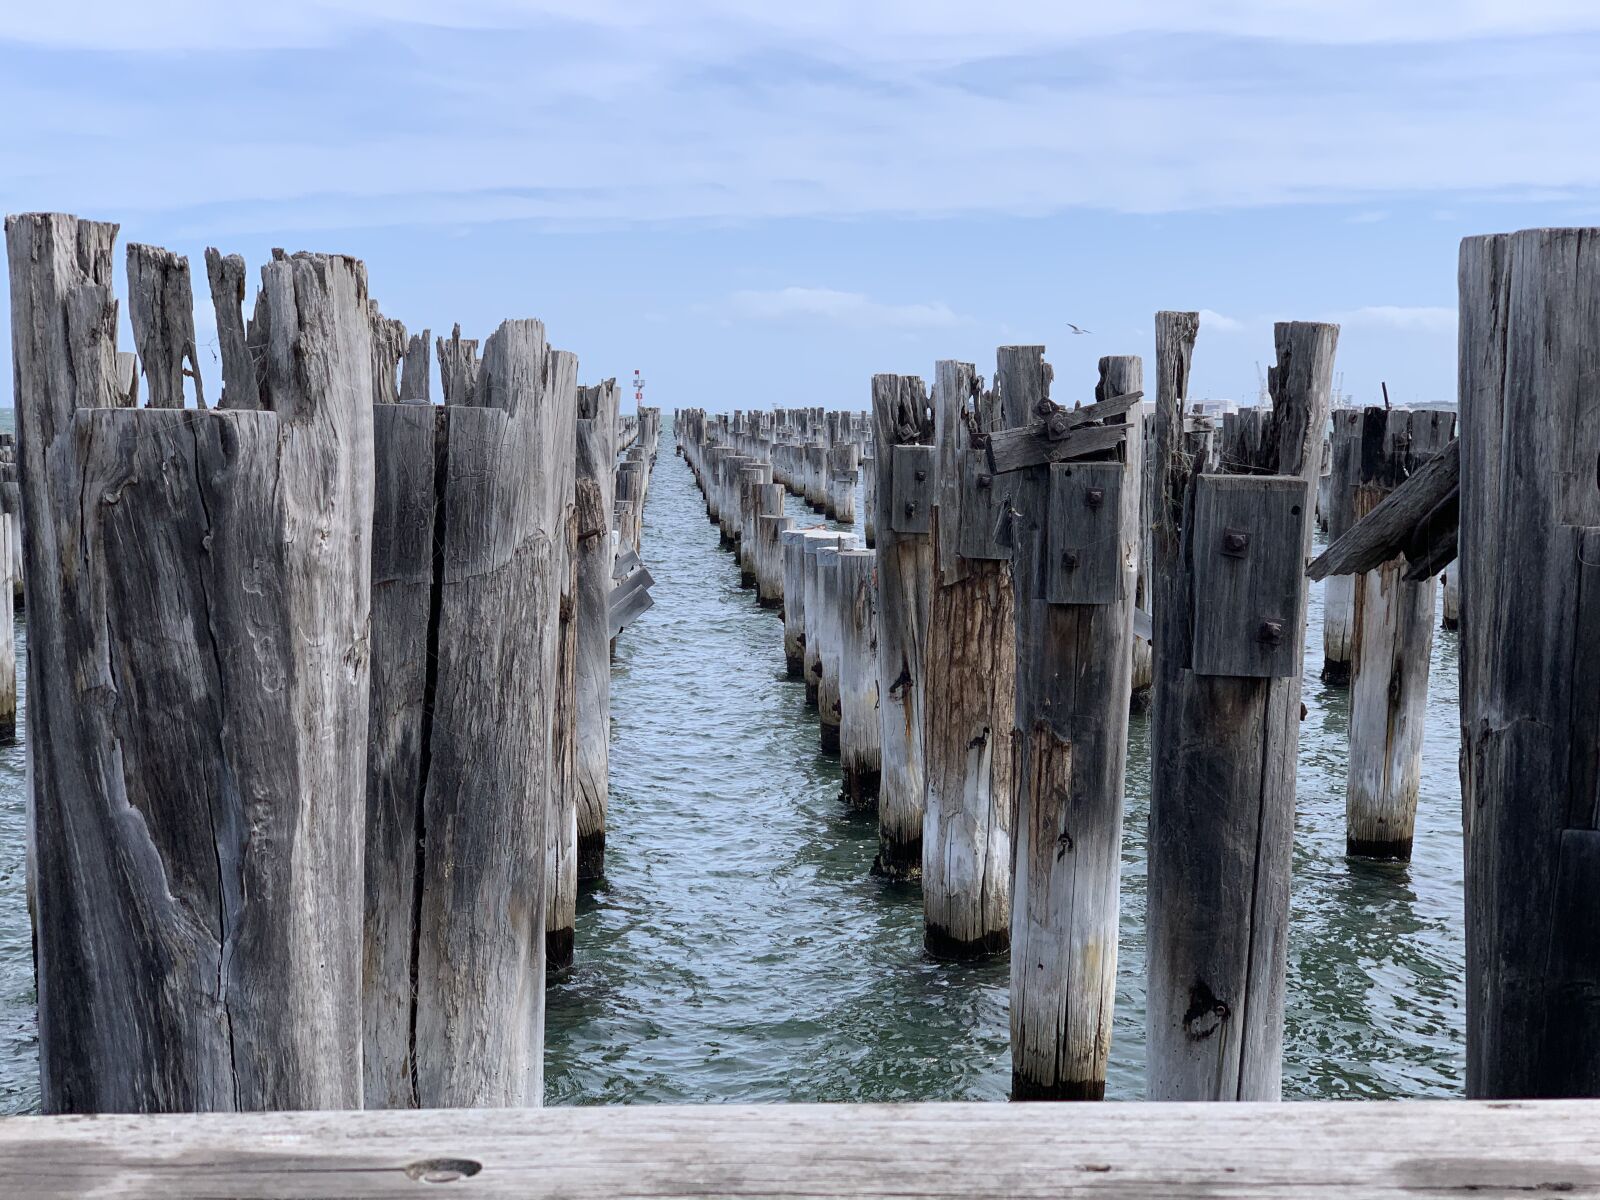 Apple iPhone XS Max + iPhone XS Max back dual camera 6mm f/2.4 sample photo. Pier, pylons, water photography